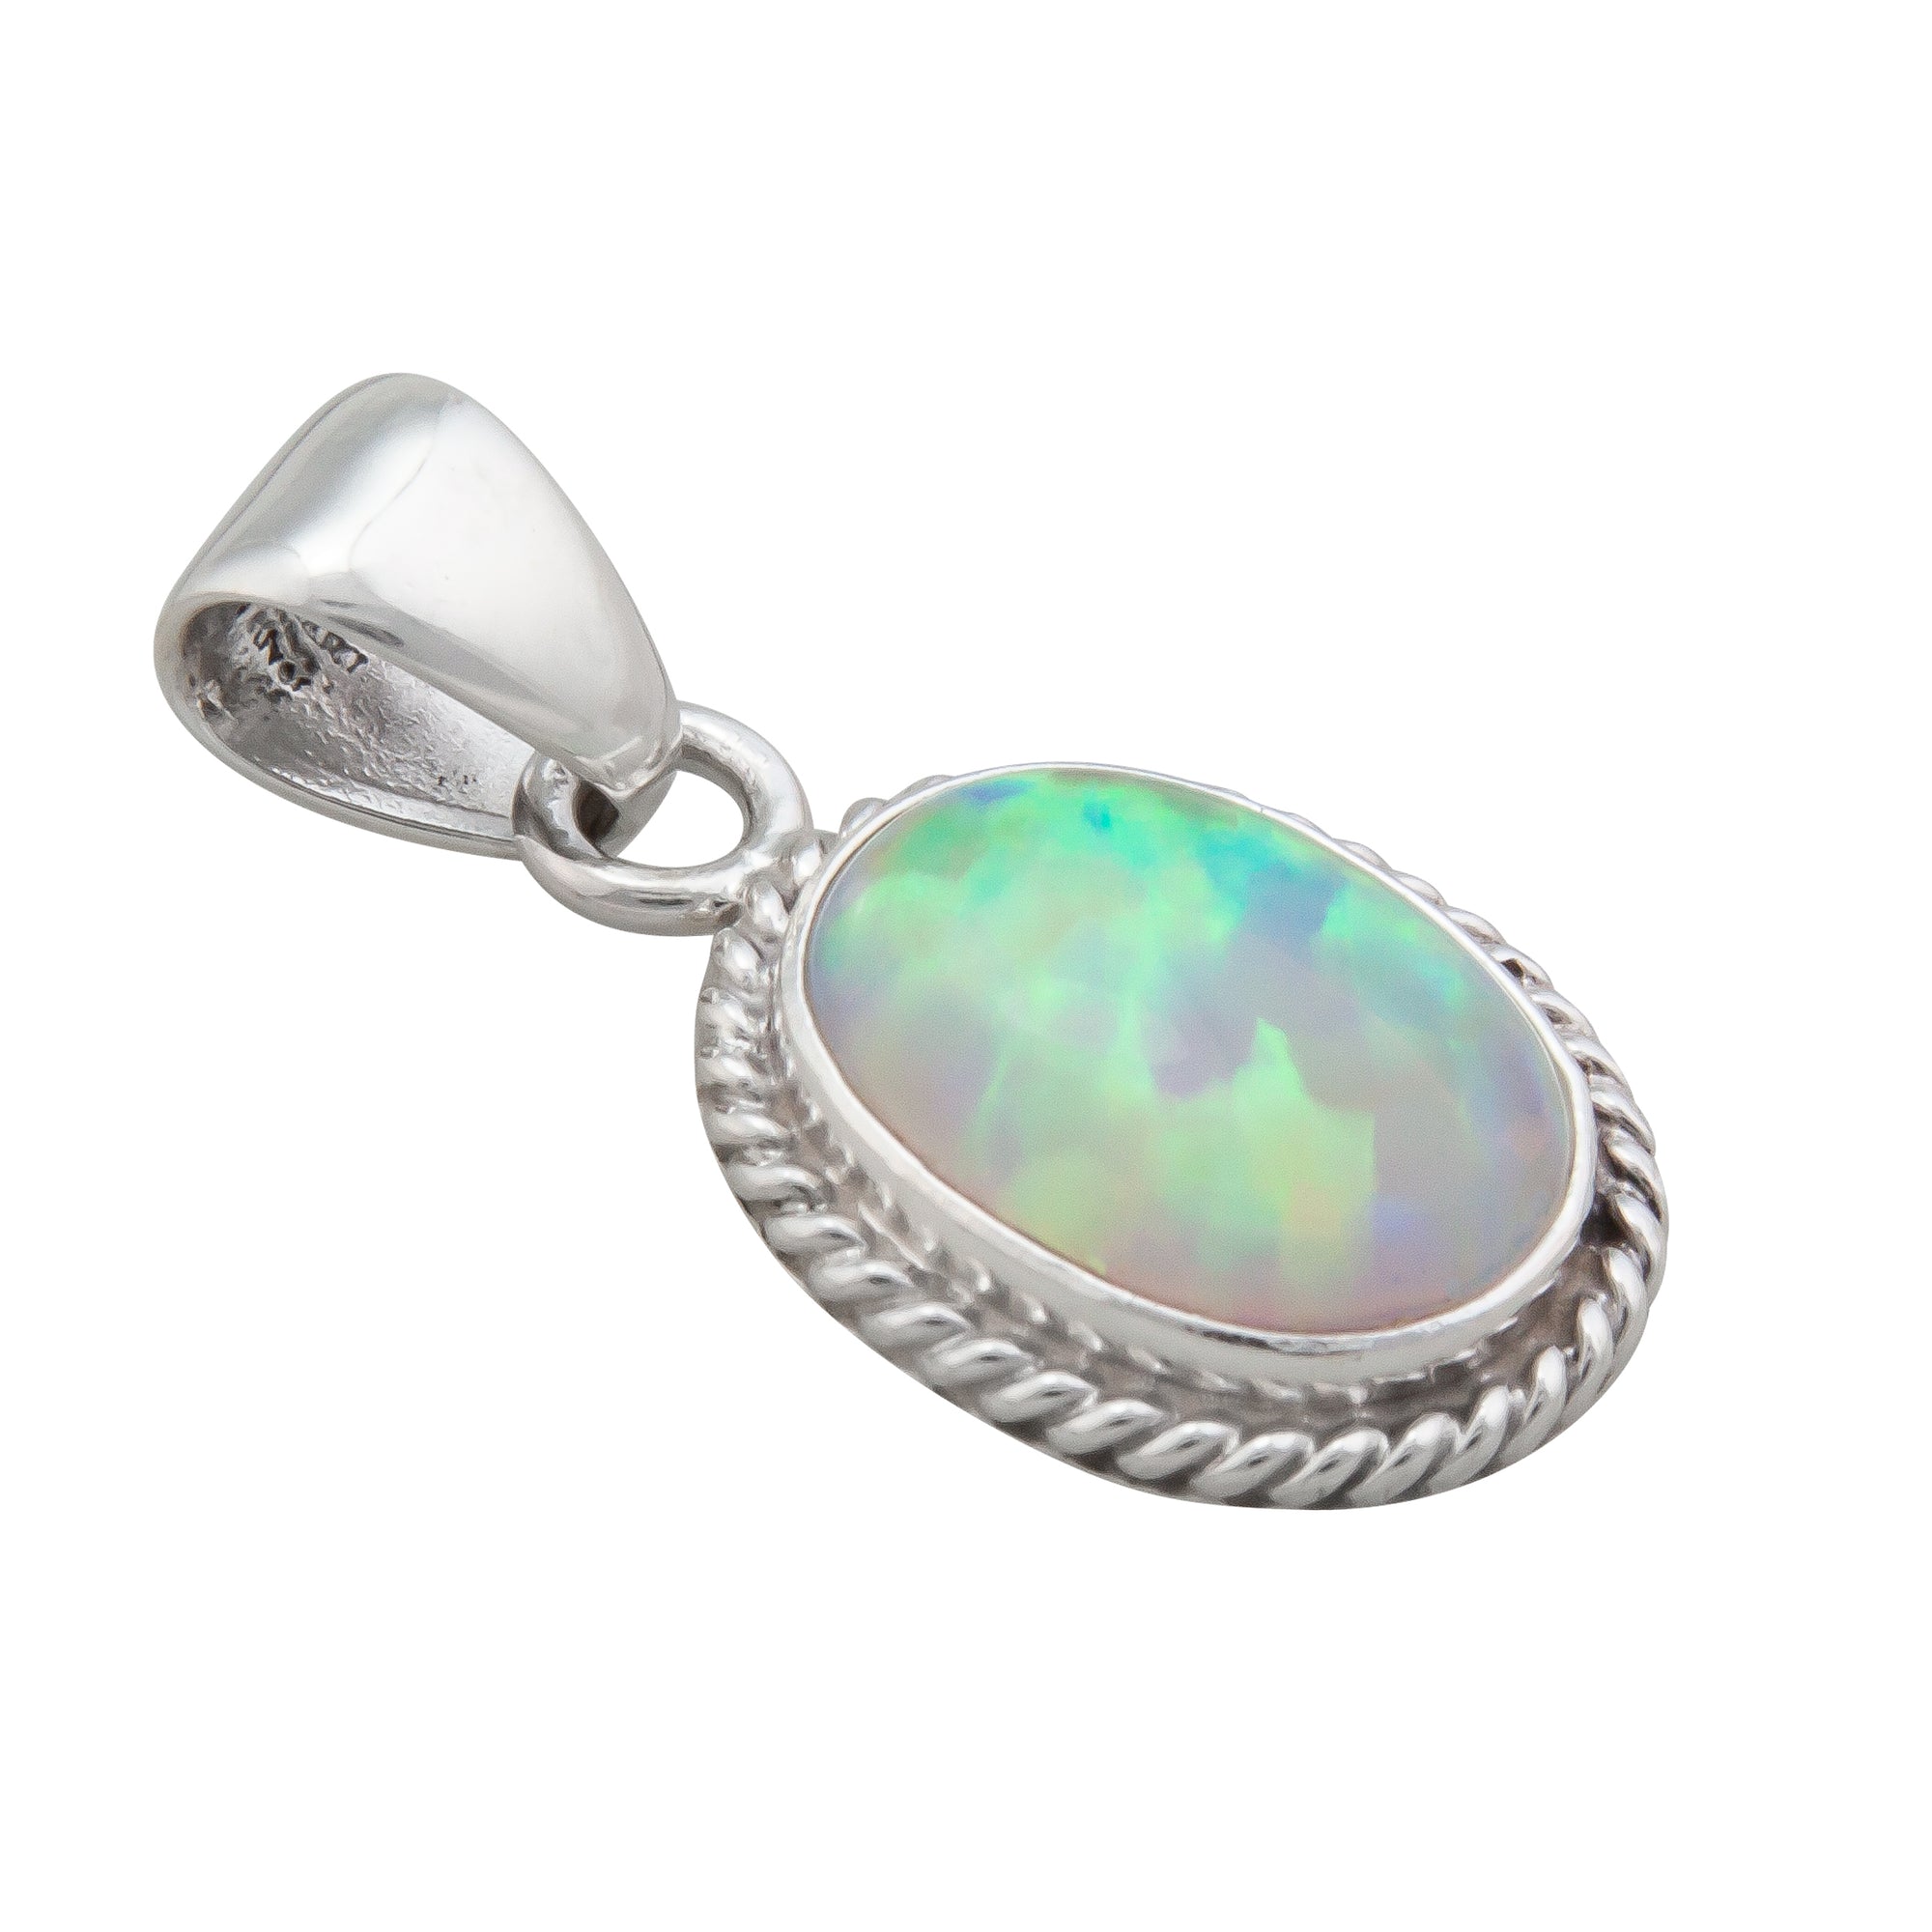 1.55 CTW OPAL AND AMETHYST PENDANT WITH 18 INCH STERLING SILVER CHAIN